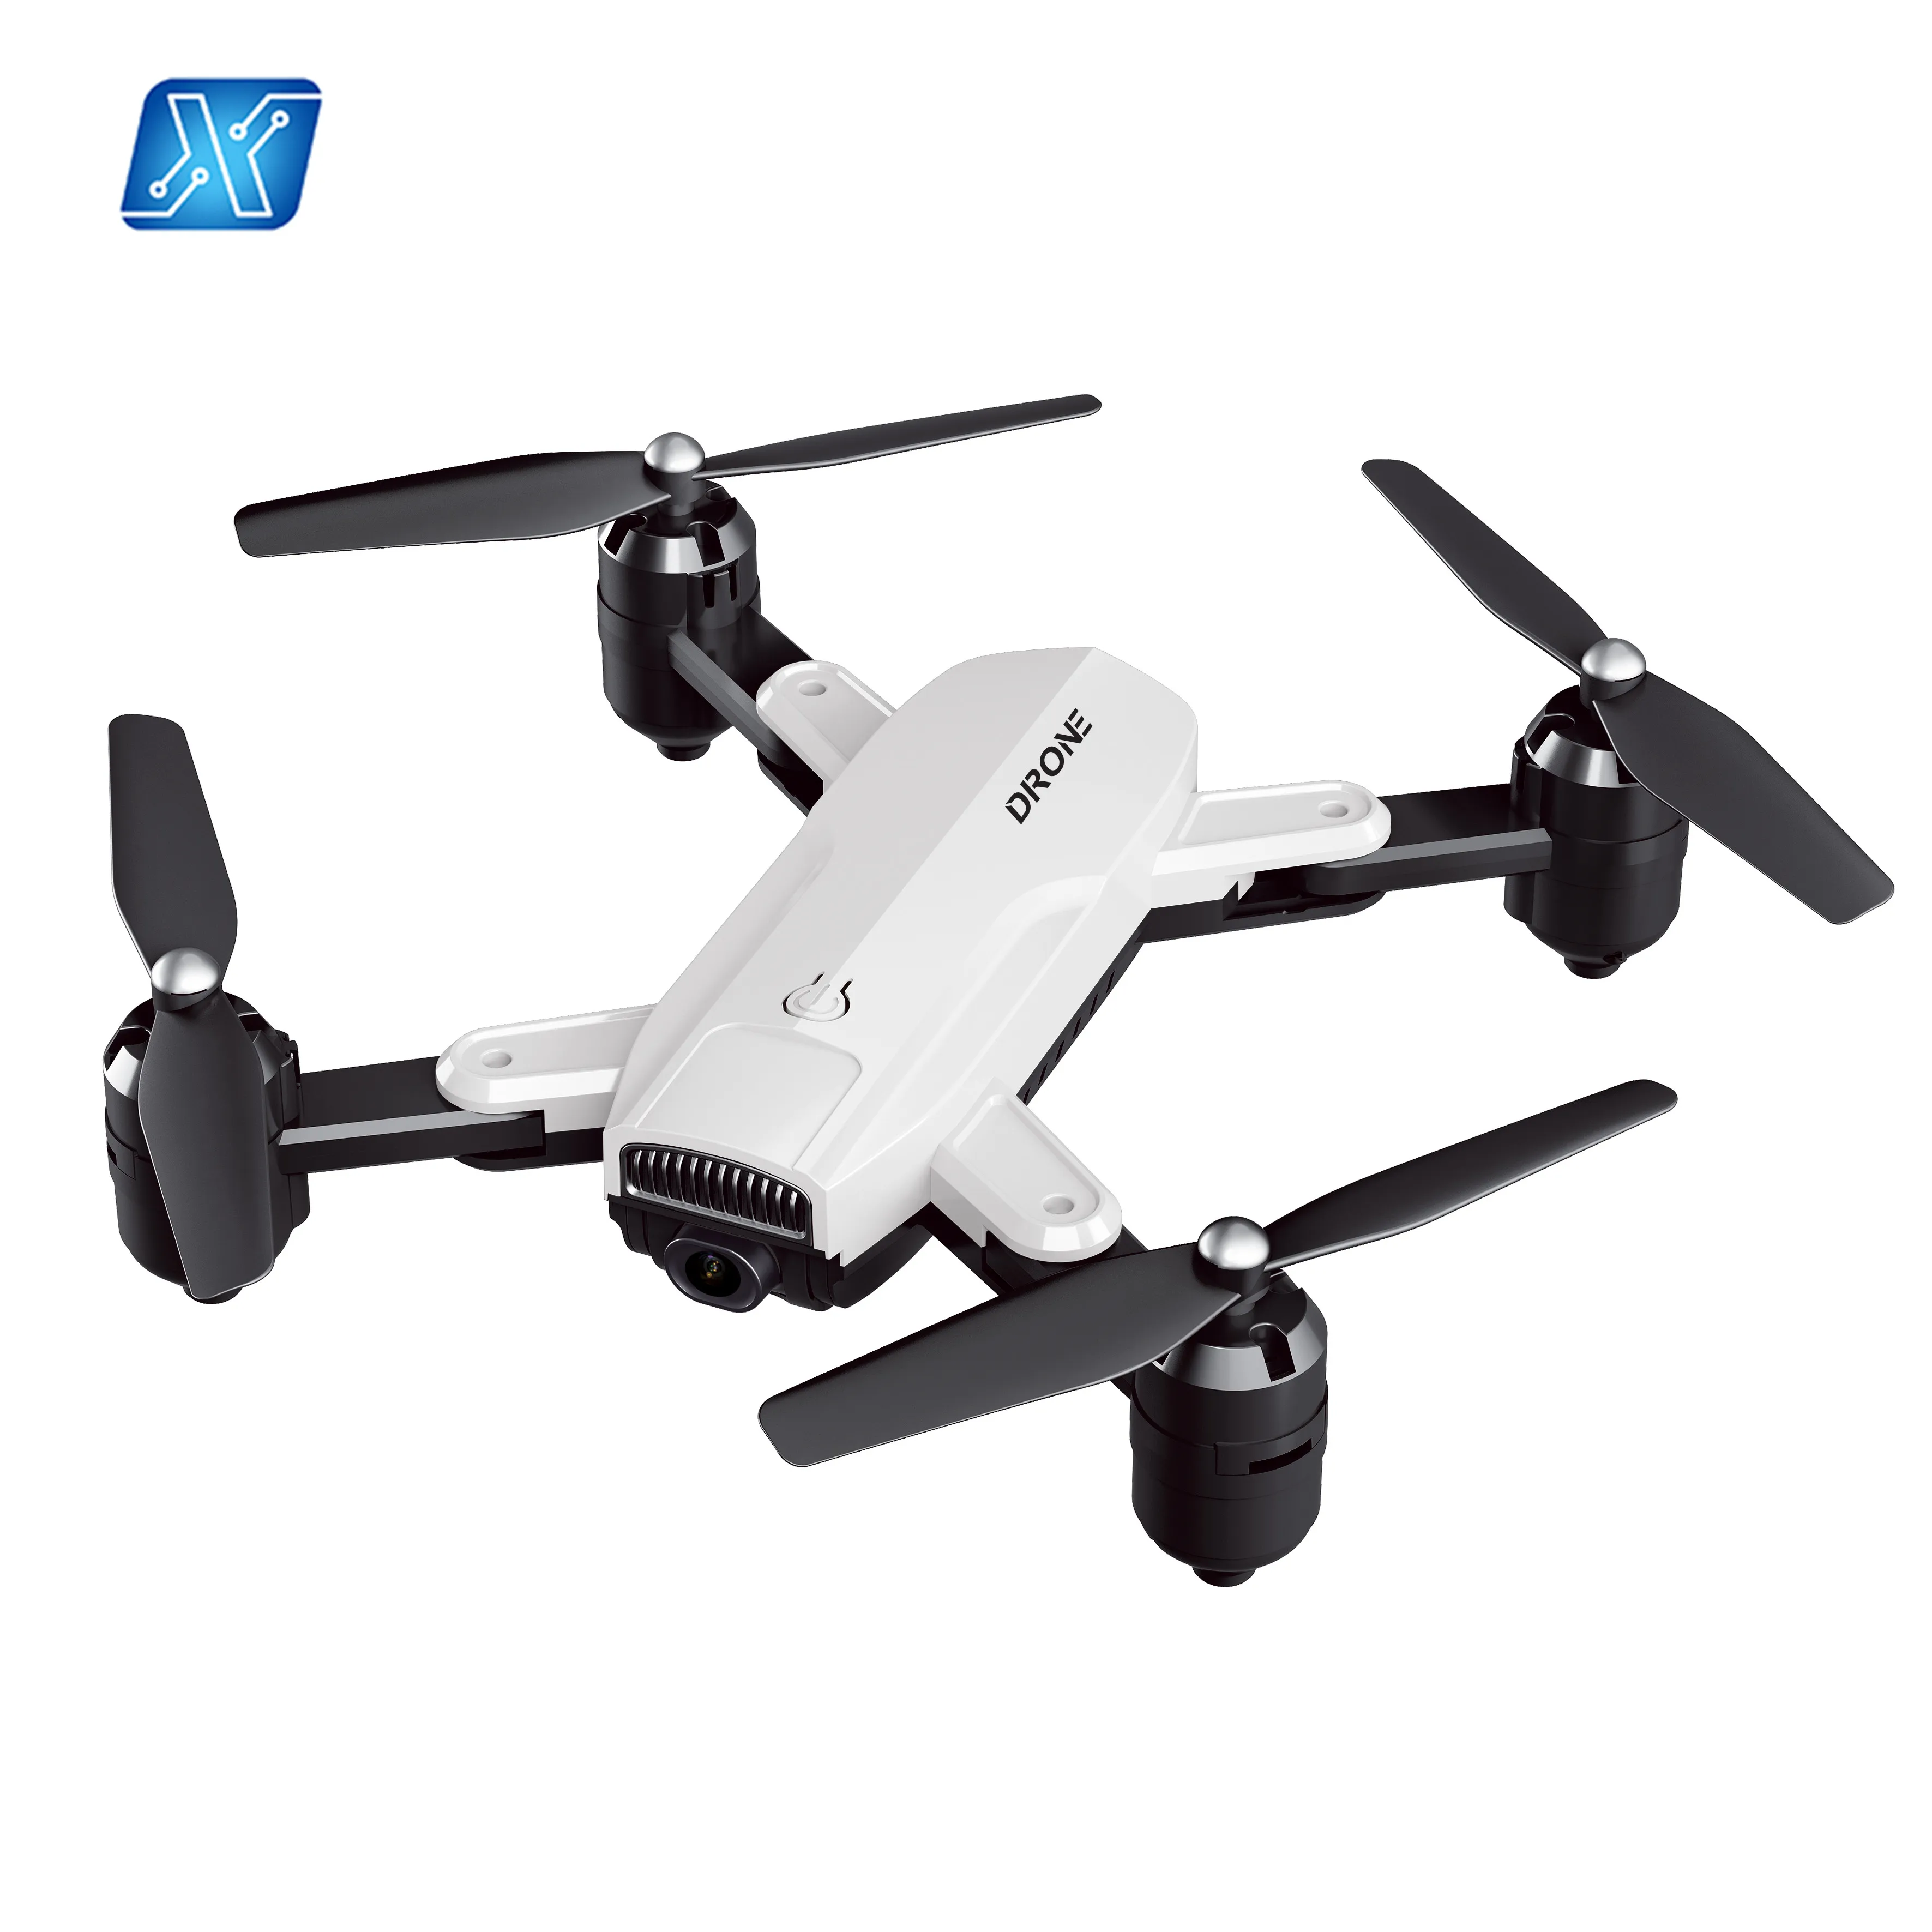 

Professional 4K HD Foldable Dron with Double Camera WiFi FPV Optical Flow Follow RC Quadcopter Helicopter Drone, Red/white/black